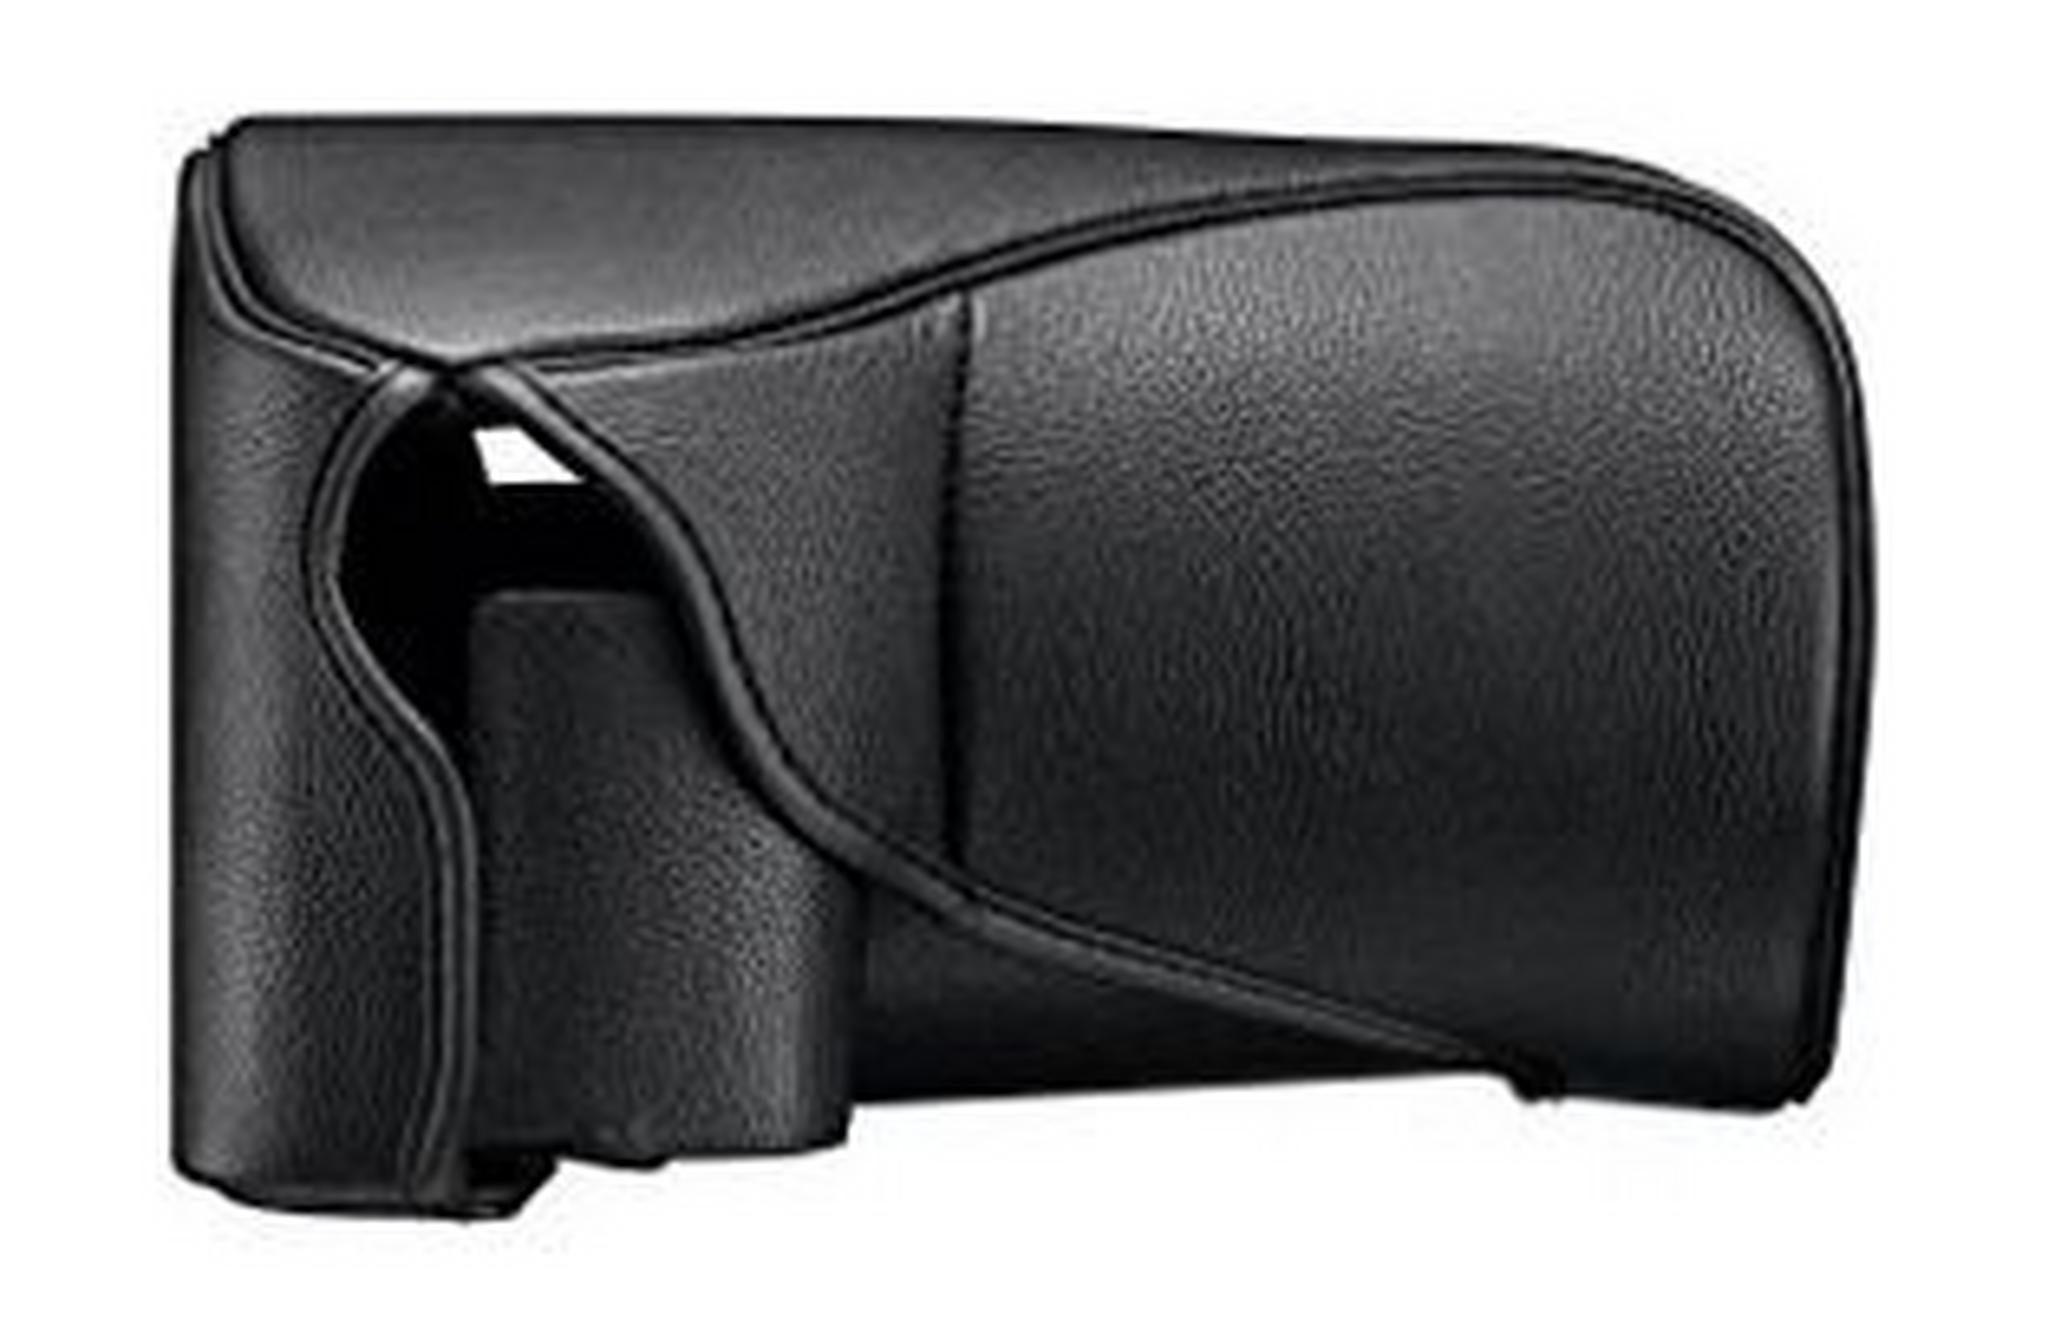 Sony Soft Carrying Case For Alpha A7II, A7RII,A7SII – Black